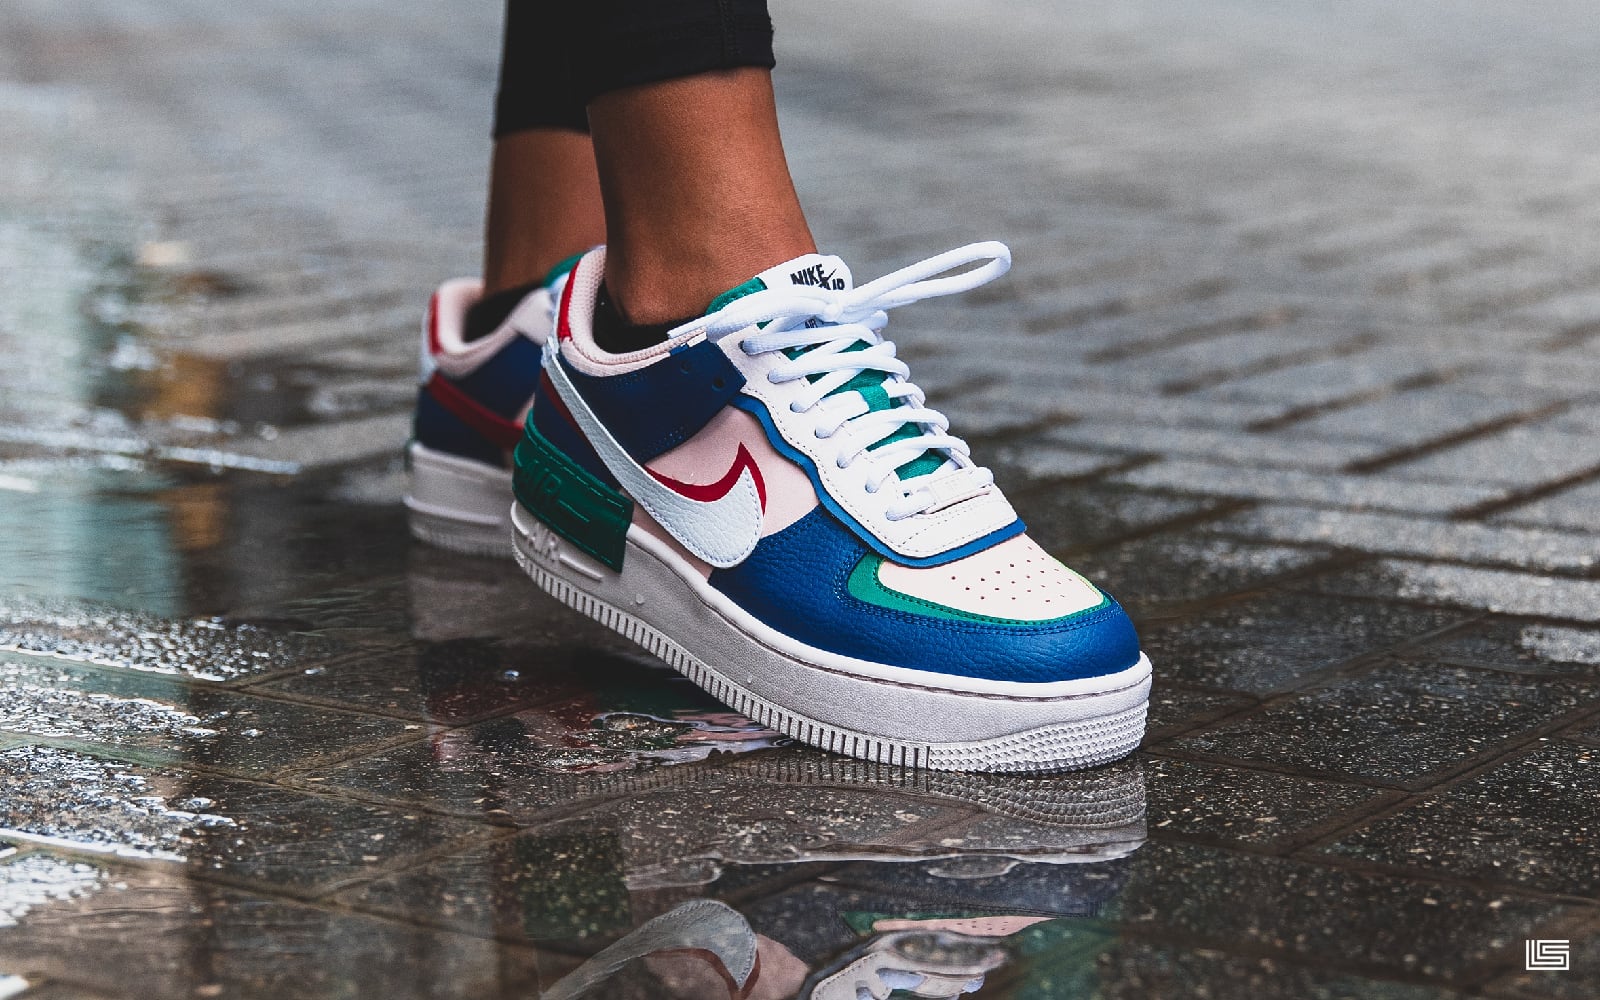 womans air force 1's